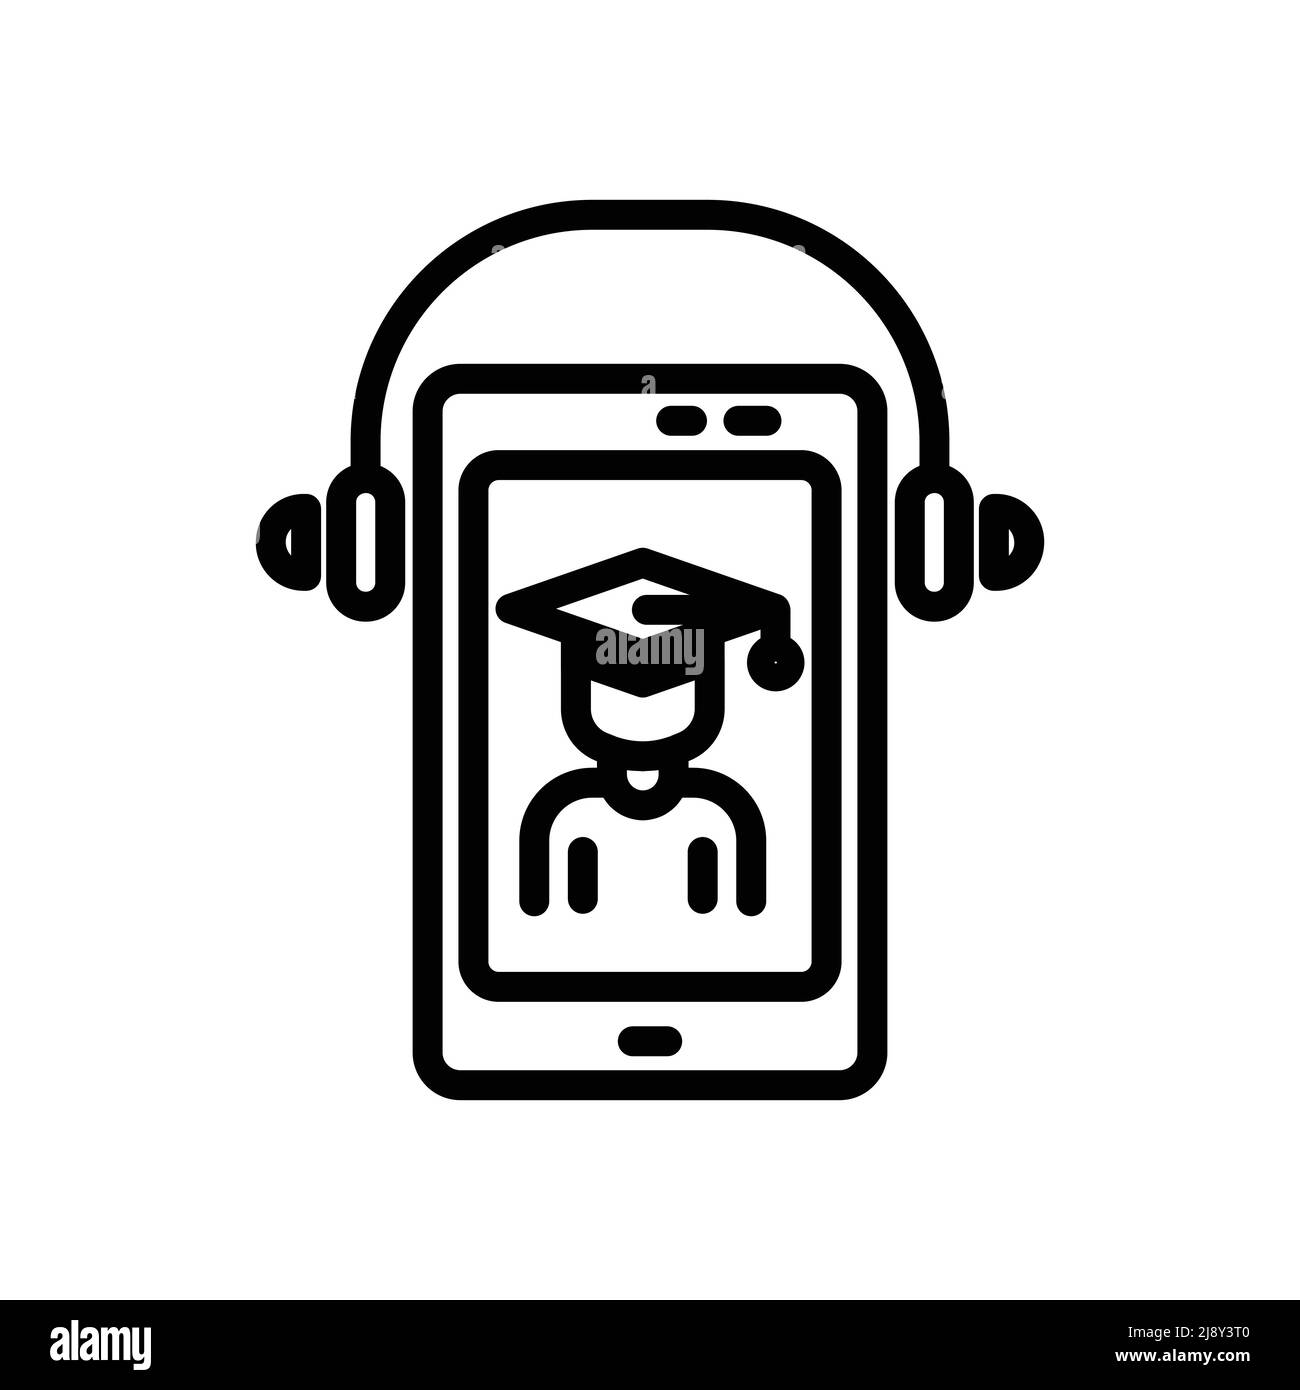 Online education icon vector. Virtual learning, student, Mobile phone headset. Line icon style. Simple design illustration editable Stock Vector